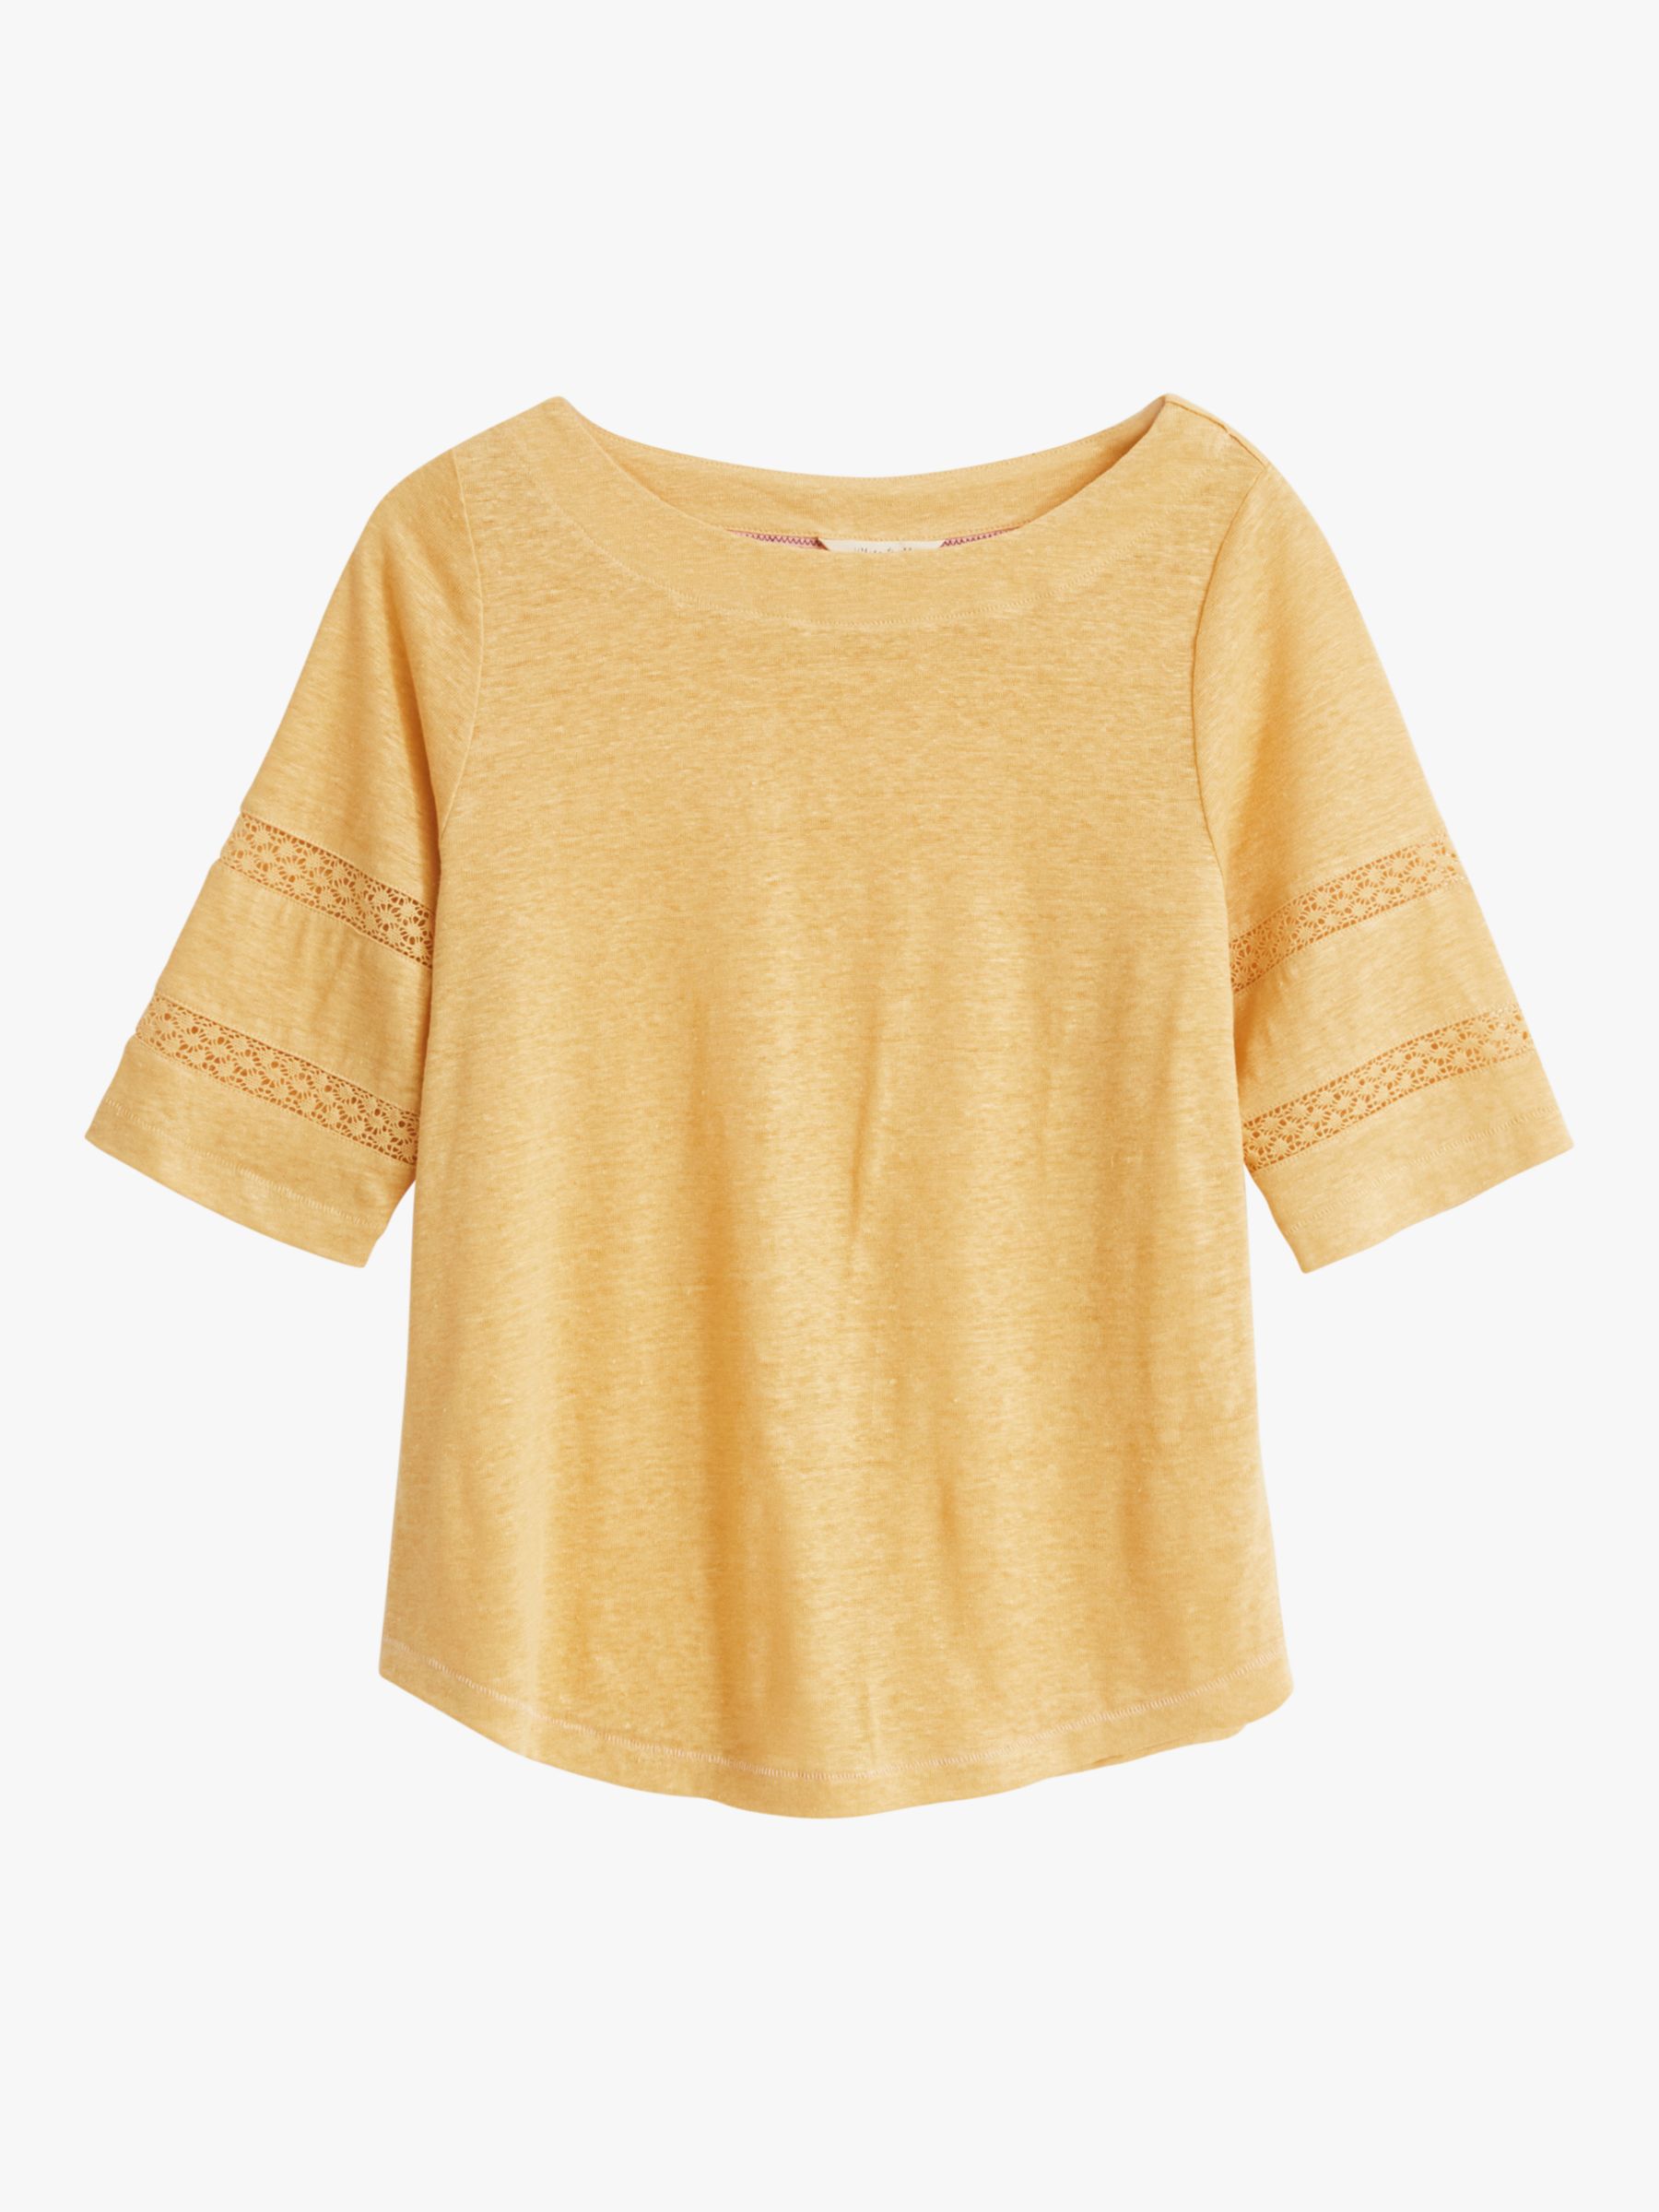 Womens Clothing Tops Short-sleeve tops PEYTON VALLEY Synthetic Elbow-sleeve Top in Yellow 